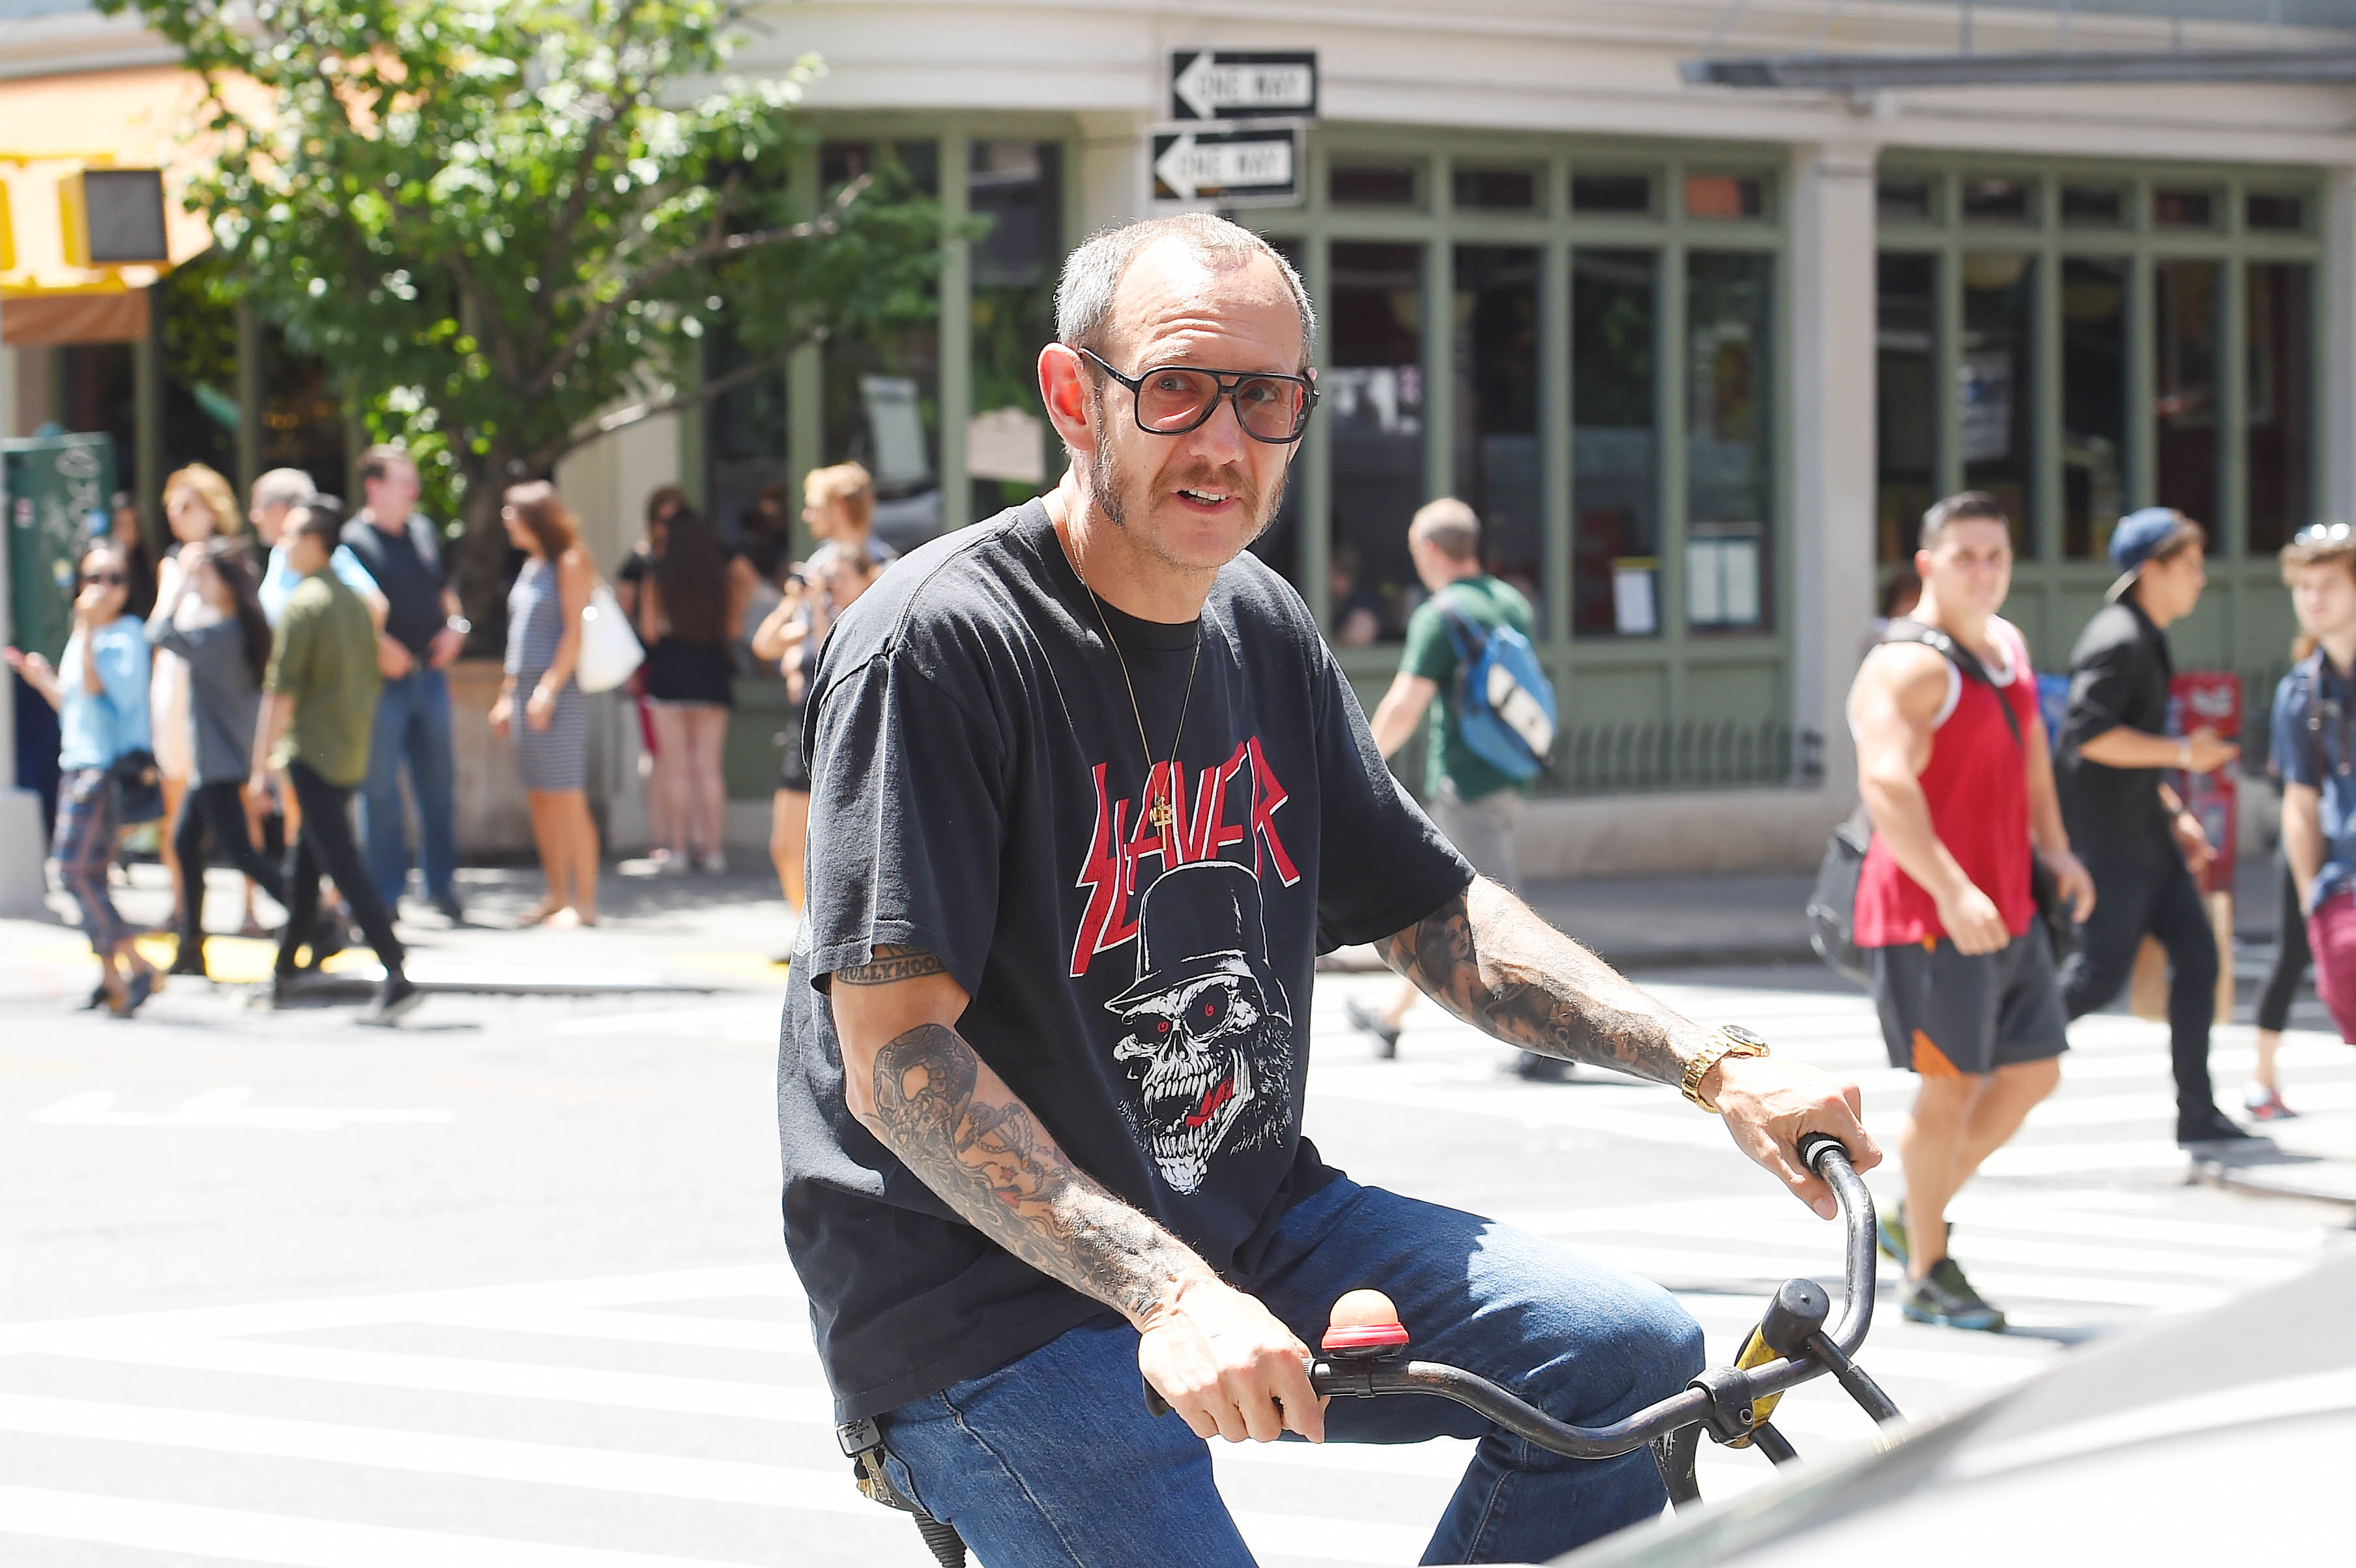 NEW YORK - JULY 24: Terry Richardson seen out in Soho with his bike on July 24, 2015 in New York, New York. (Photo by Josiah Kamau/BuzzFoto via Getty Images) (Josiah Kamau—BuzzFoto via Getty Images)